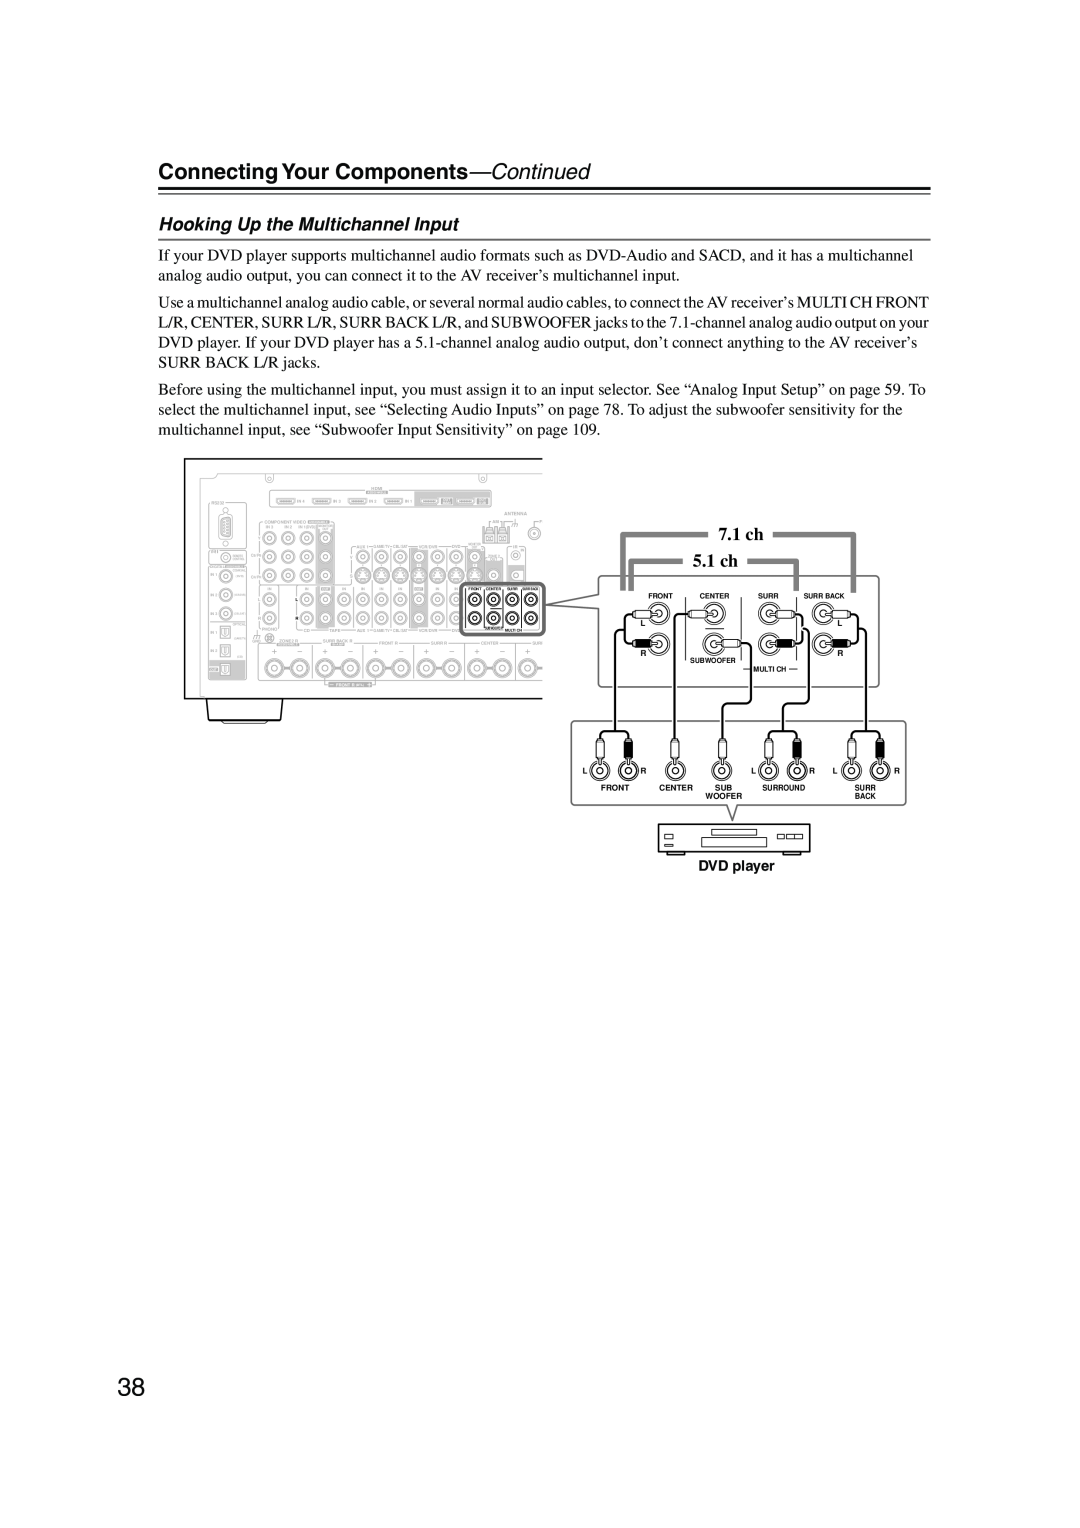 Onkyo TX-NR905 instruction manual Hooking Up the Multichannel Input, Connecting Your Components—Continued, 7.1 ch, 5.1 ch 